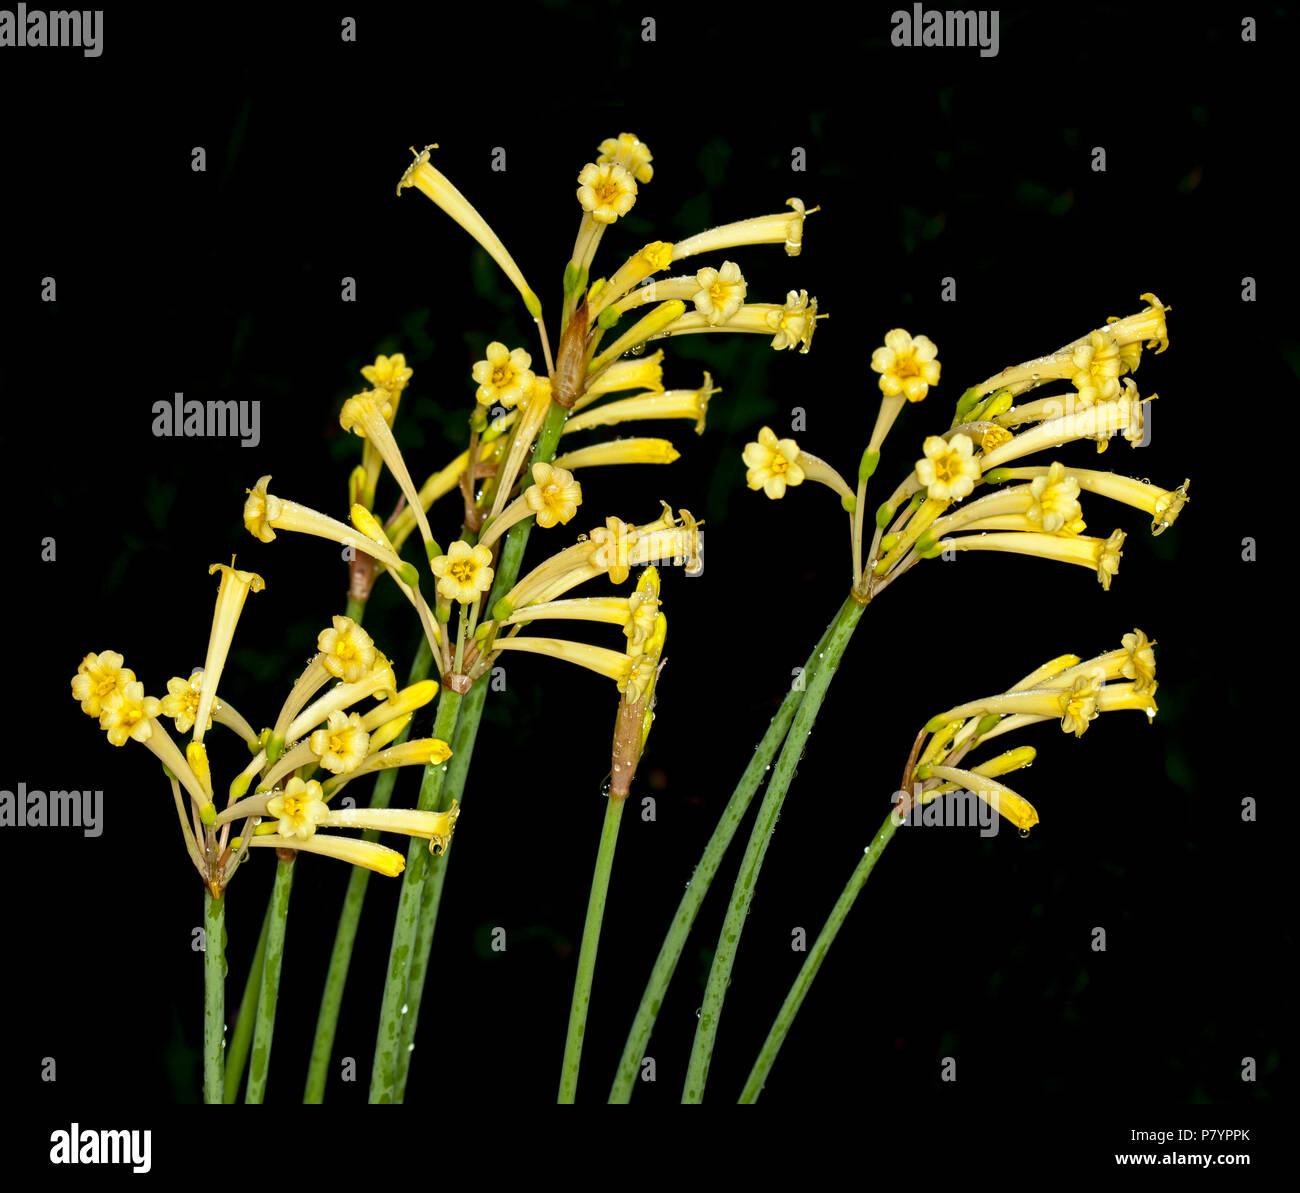 Cluster of yellow flowers of Crytanthus mackenii cultivar, South African Fire Lily, a winter flowering bulb, on black background Stock Photo